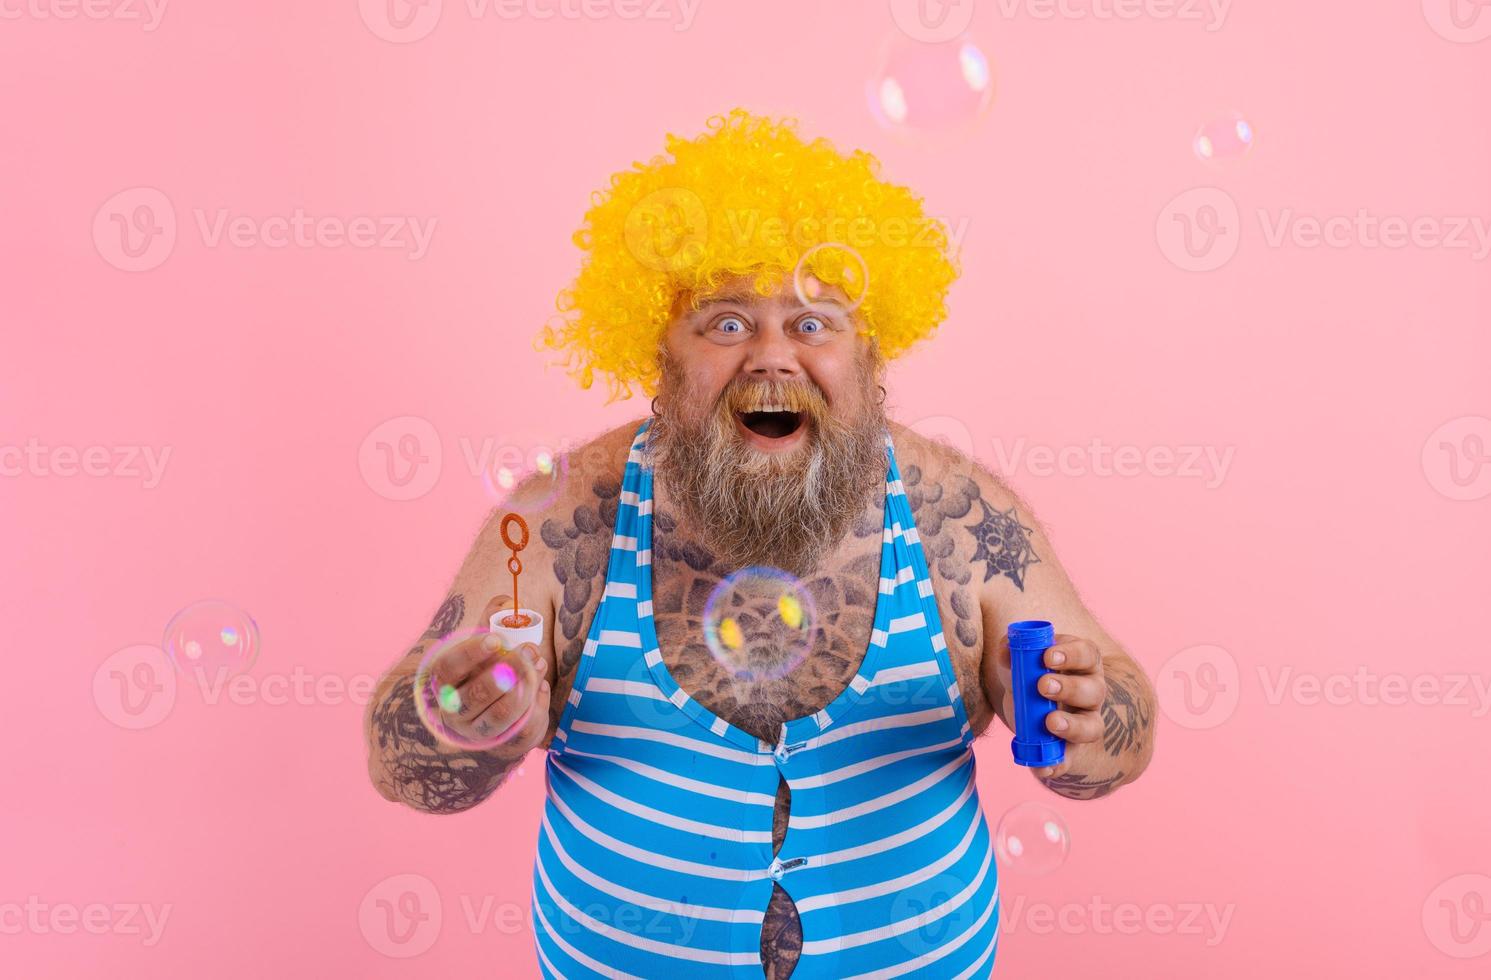 Amazed man with yellow wig in head play with bubbles soap photo